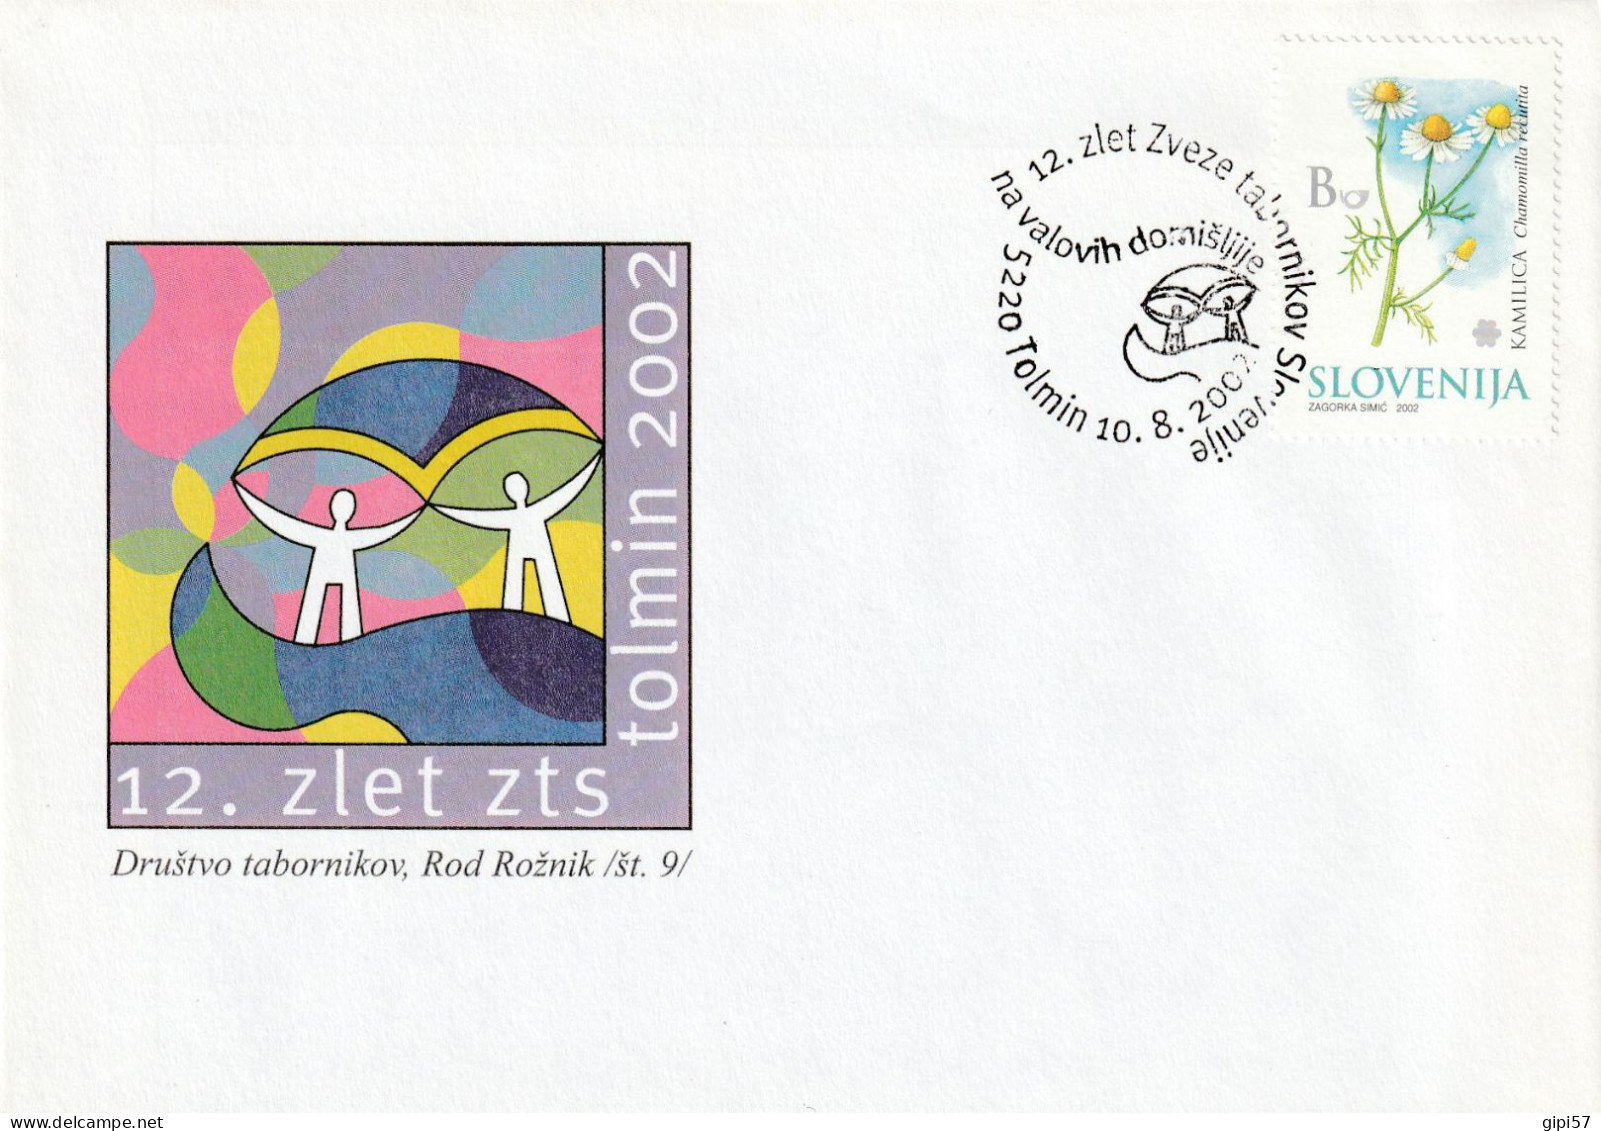 SCOUT SLOVENIA 2007 - FDC 12. FLY ON THE IMMAGINATION. SPECIAL CANCEL TOLMIN - Slovenia